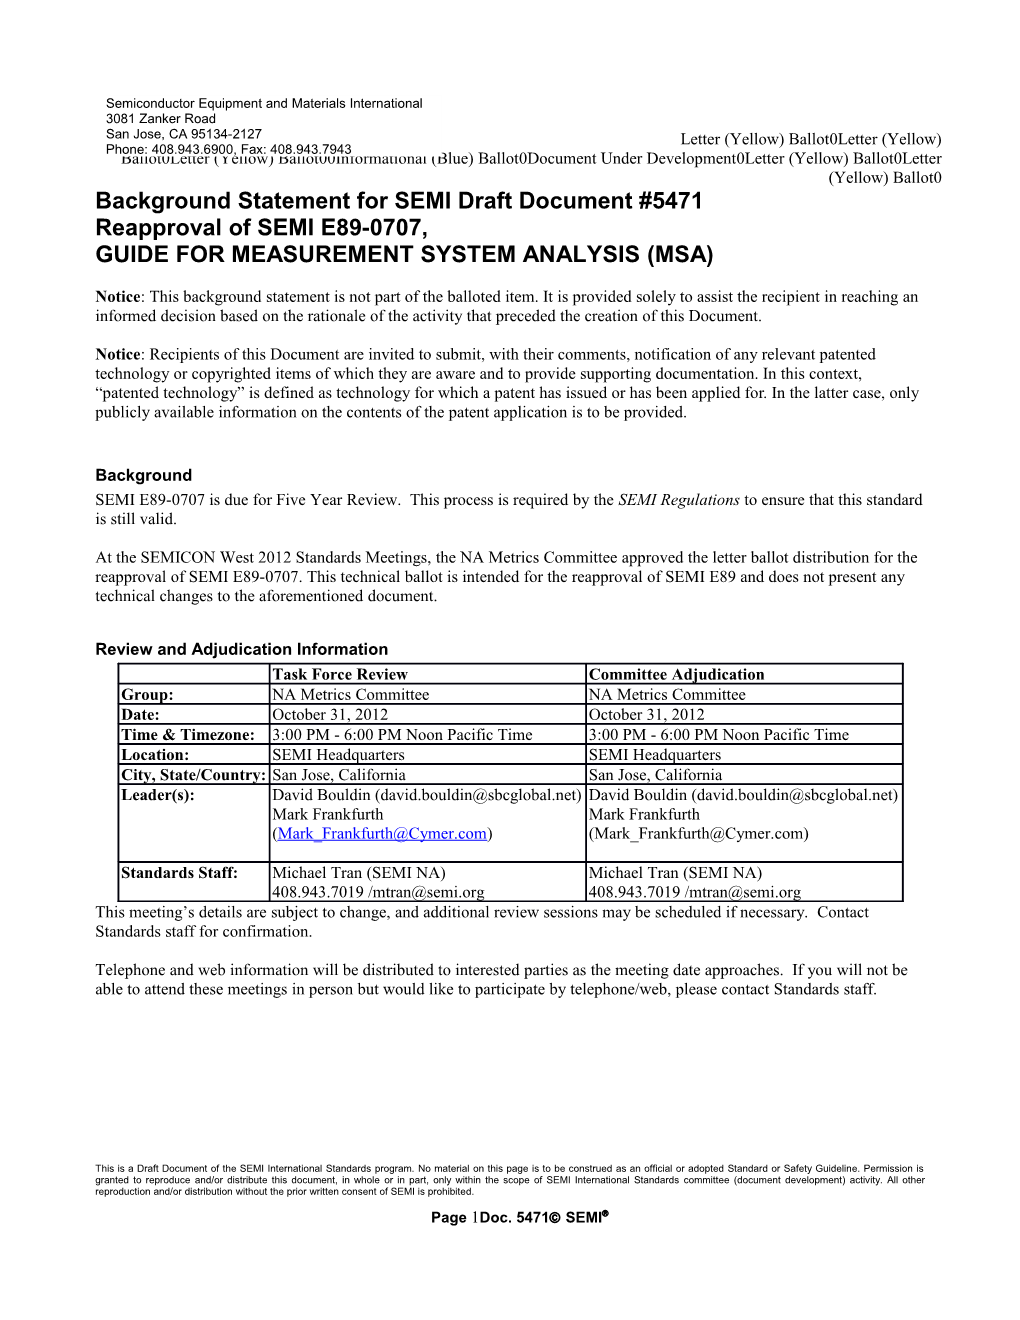 Background Statement for SEMI Draft Document #5471